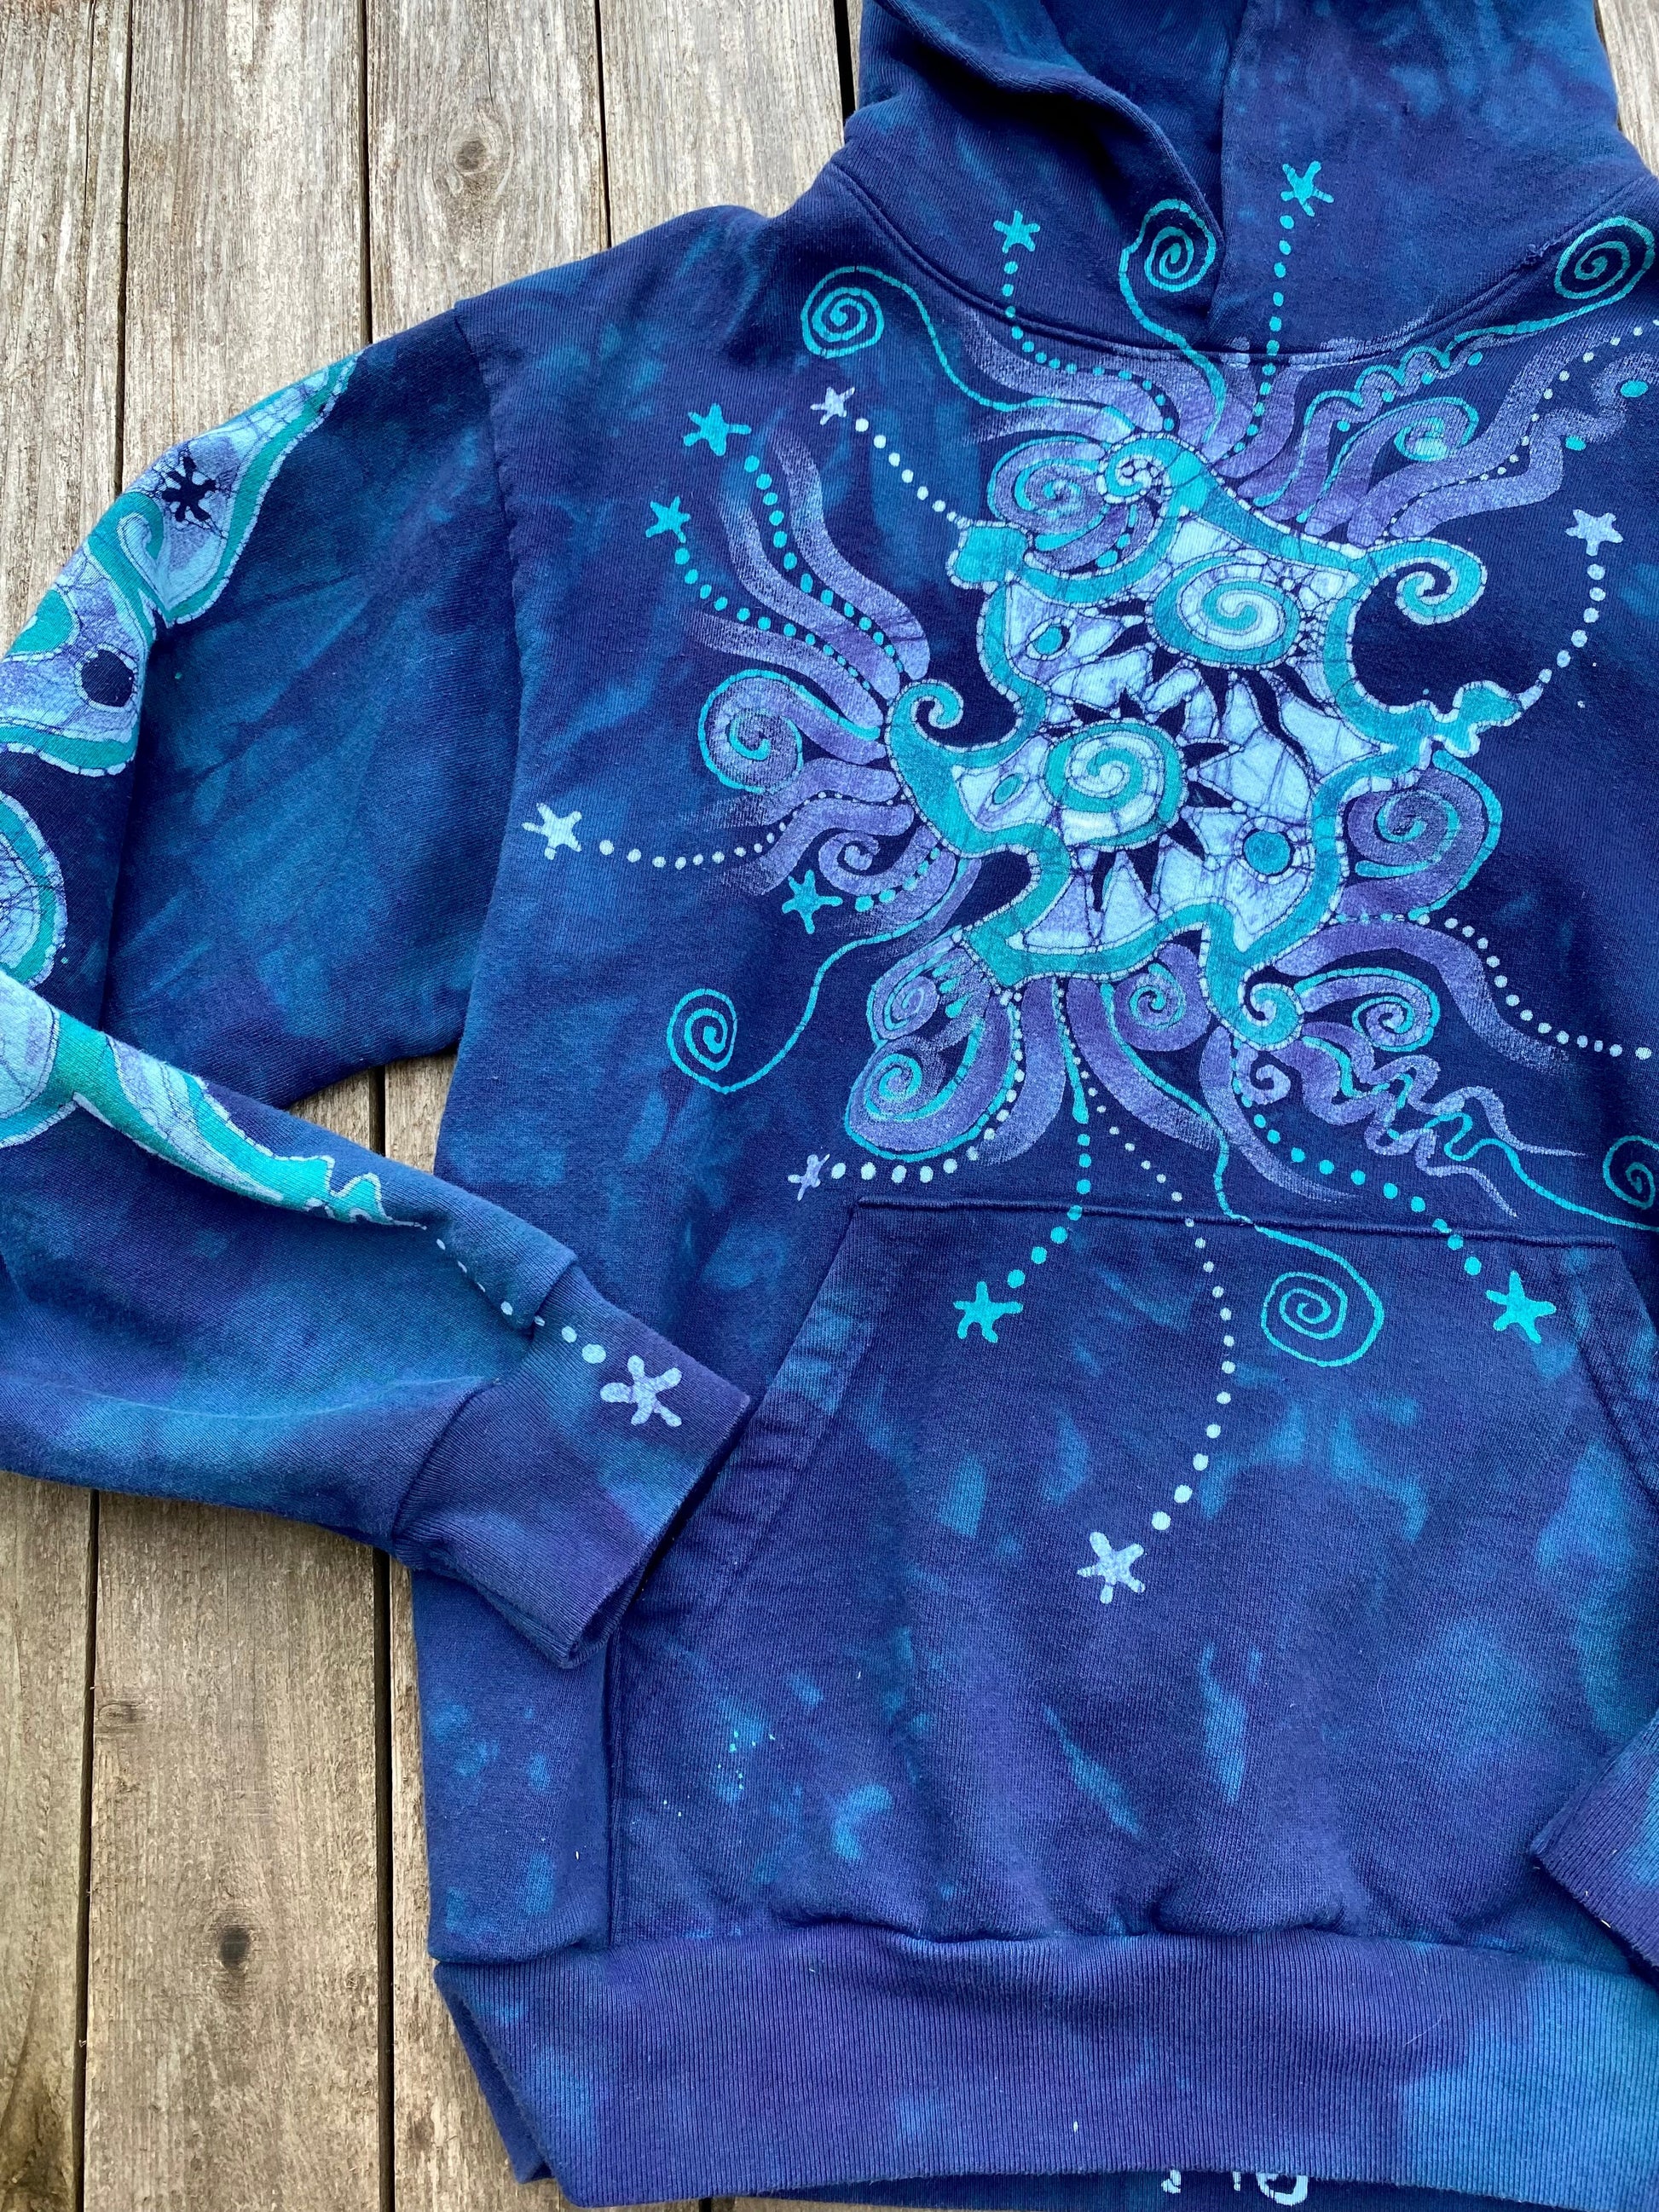 Aqua Serene Moon and Stars - Handcrafted Batik Pullover Hoodie - Size Small ONLY hoodie batikwalla 